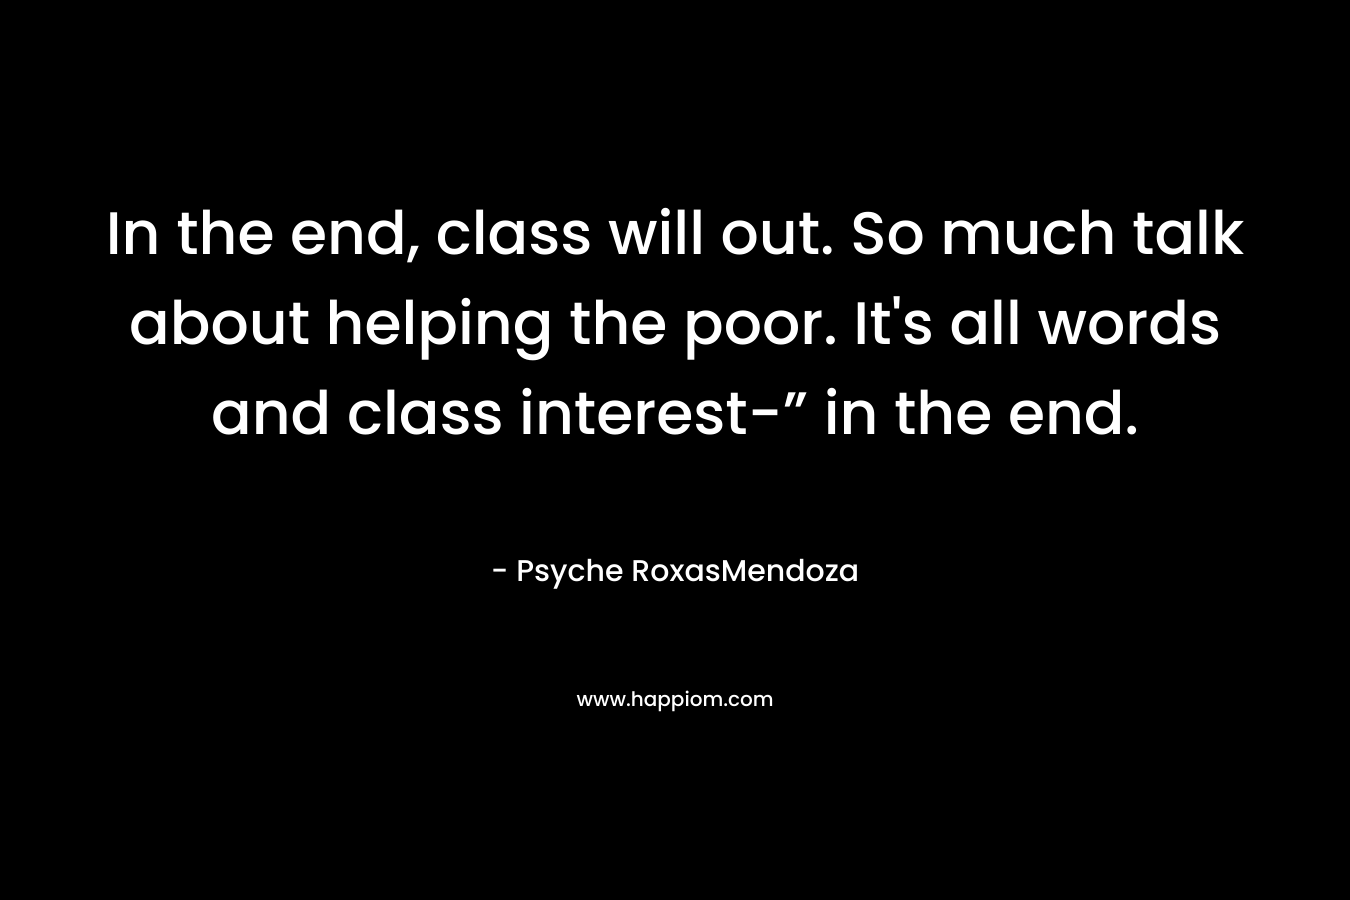 In the end, class will out. So much talk about helping the poor. It's all words and class interest-” in the end.